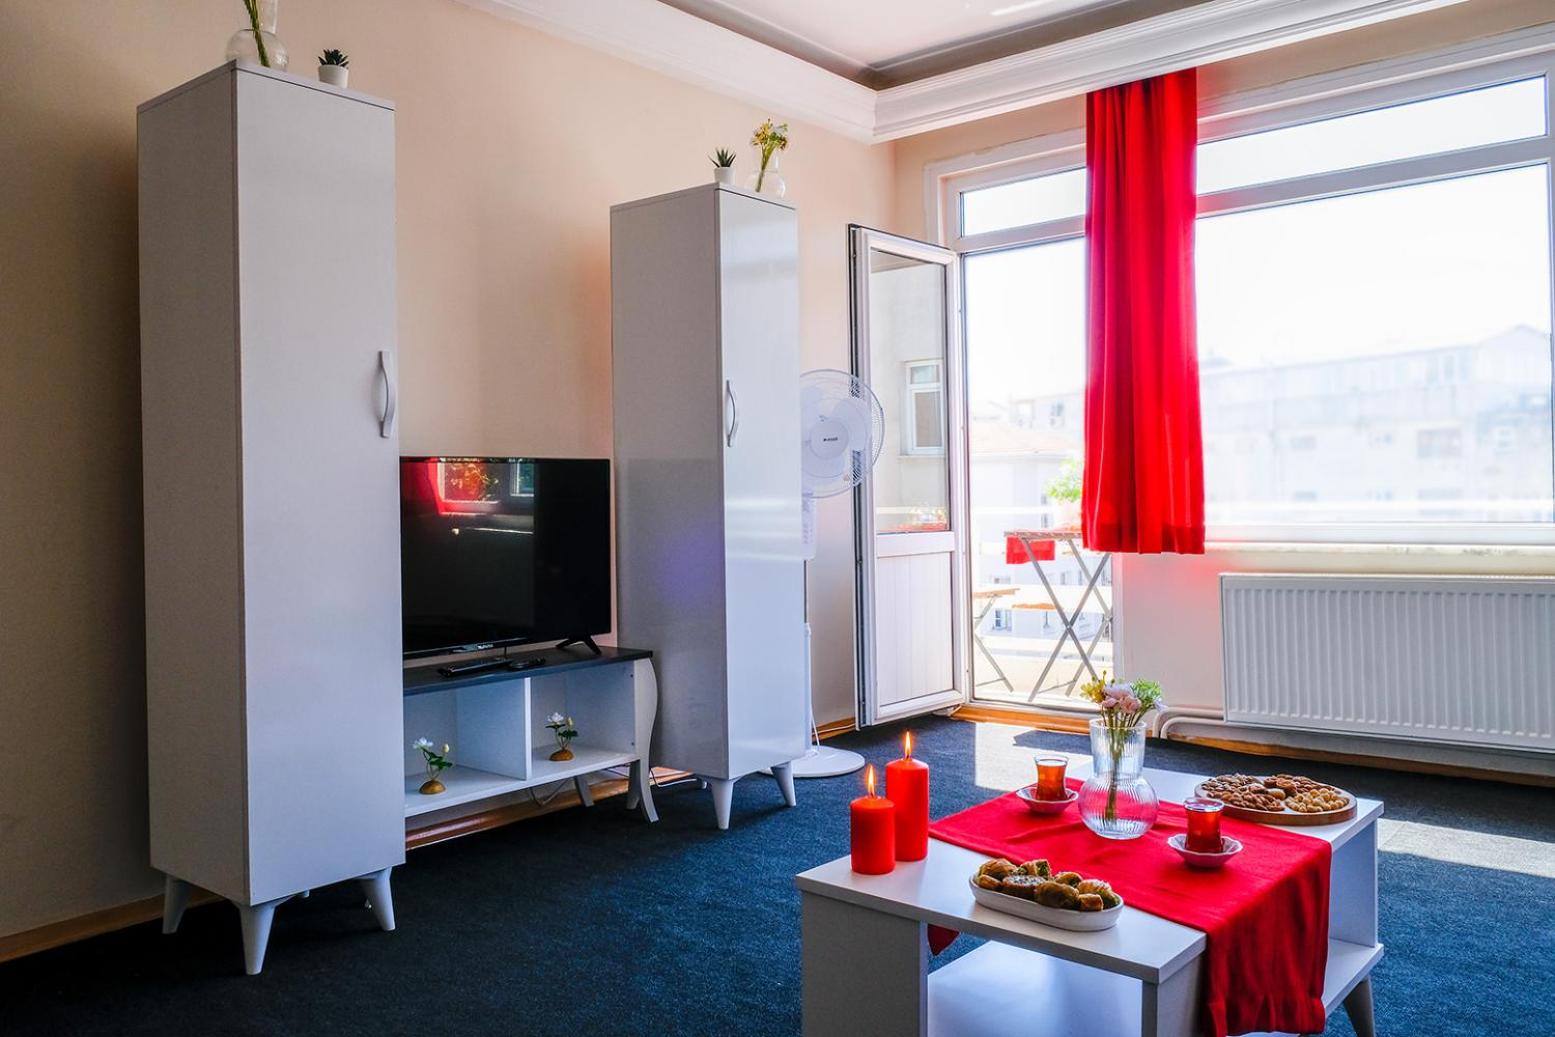 3+1 NEW Kadıköy Istanbul entire flat furnished apartment for rent in the heart of Kadikoy